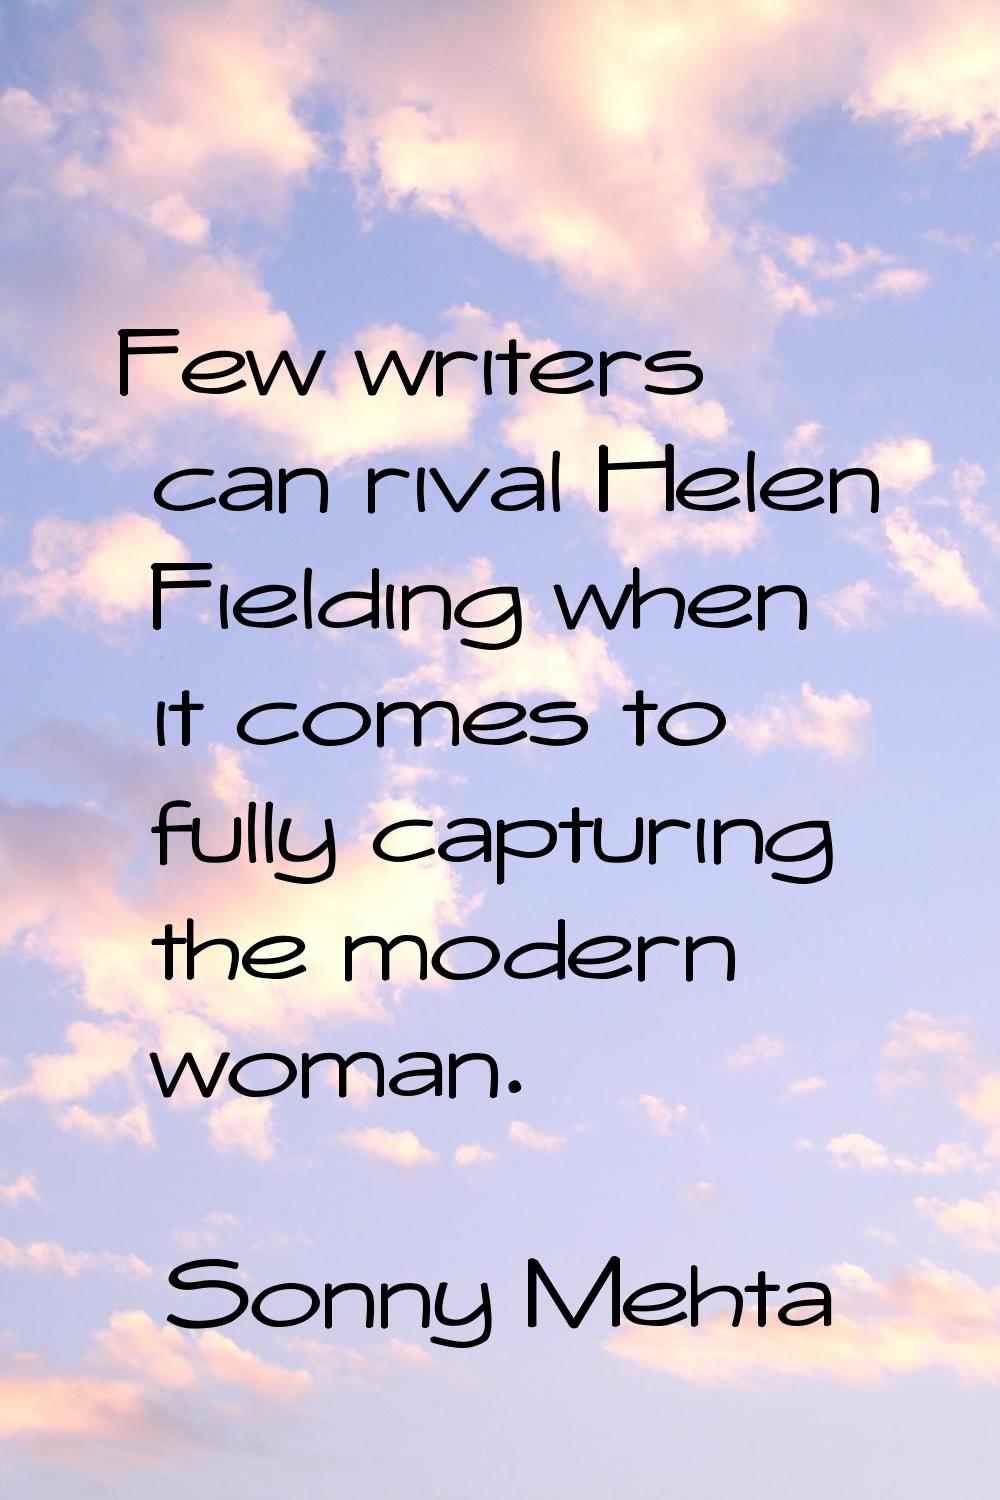 Few writers can rival Helen Fielding when it comes to fully capturing the modern woman.